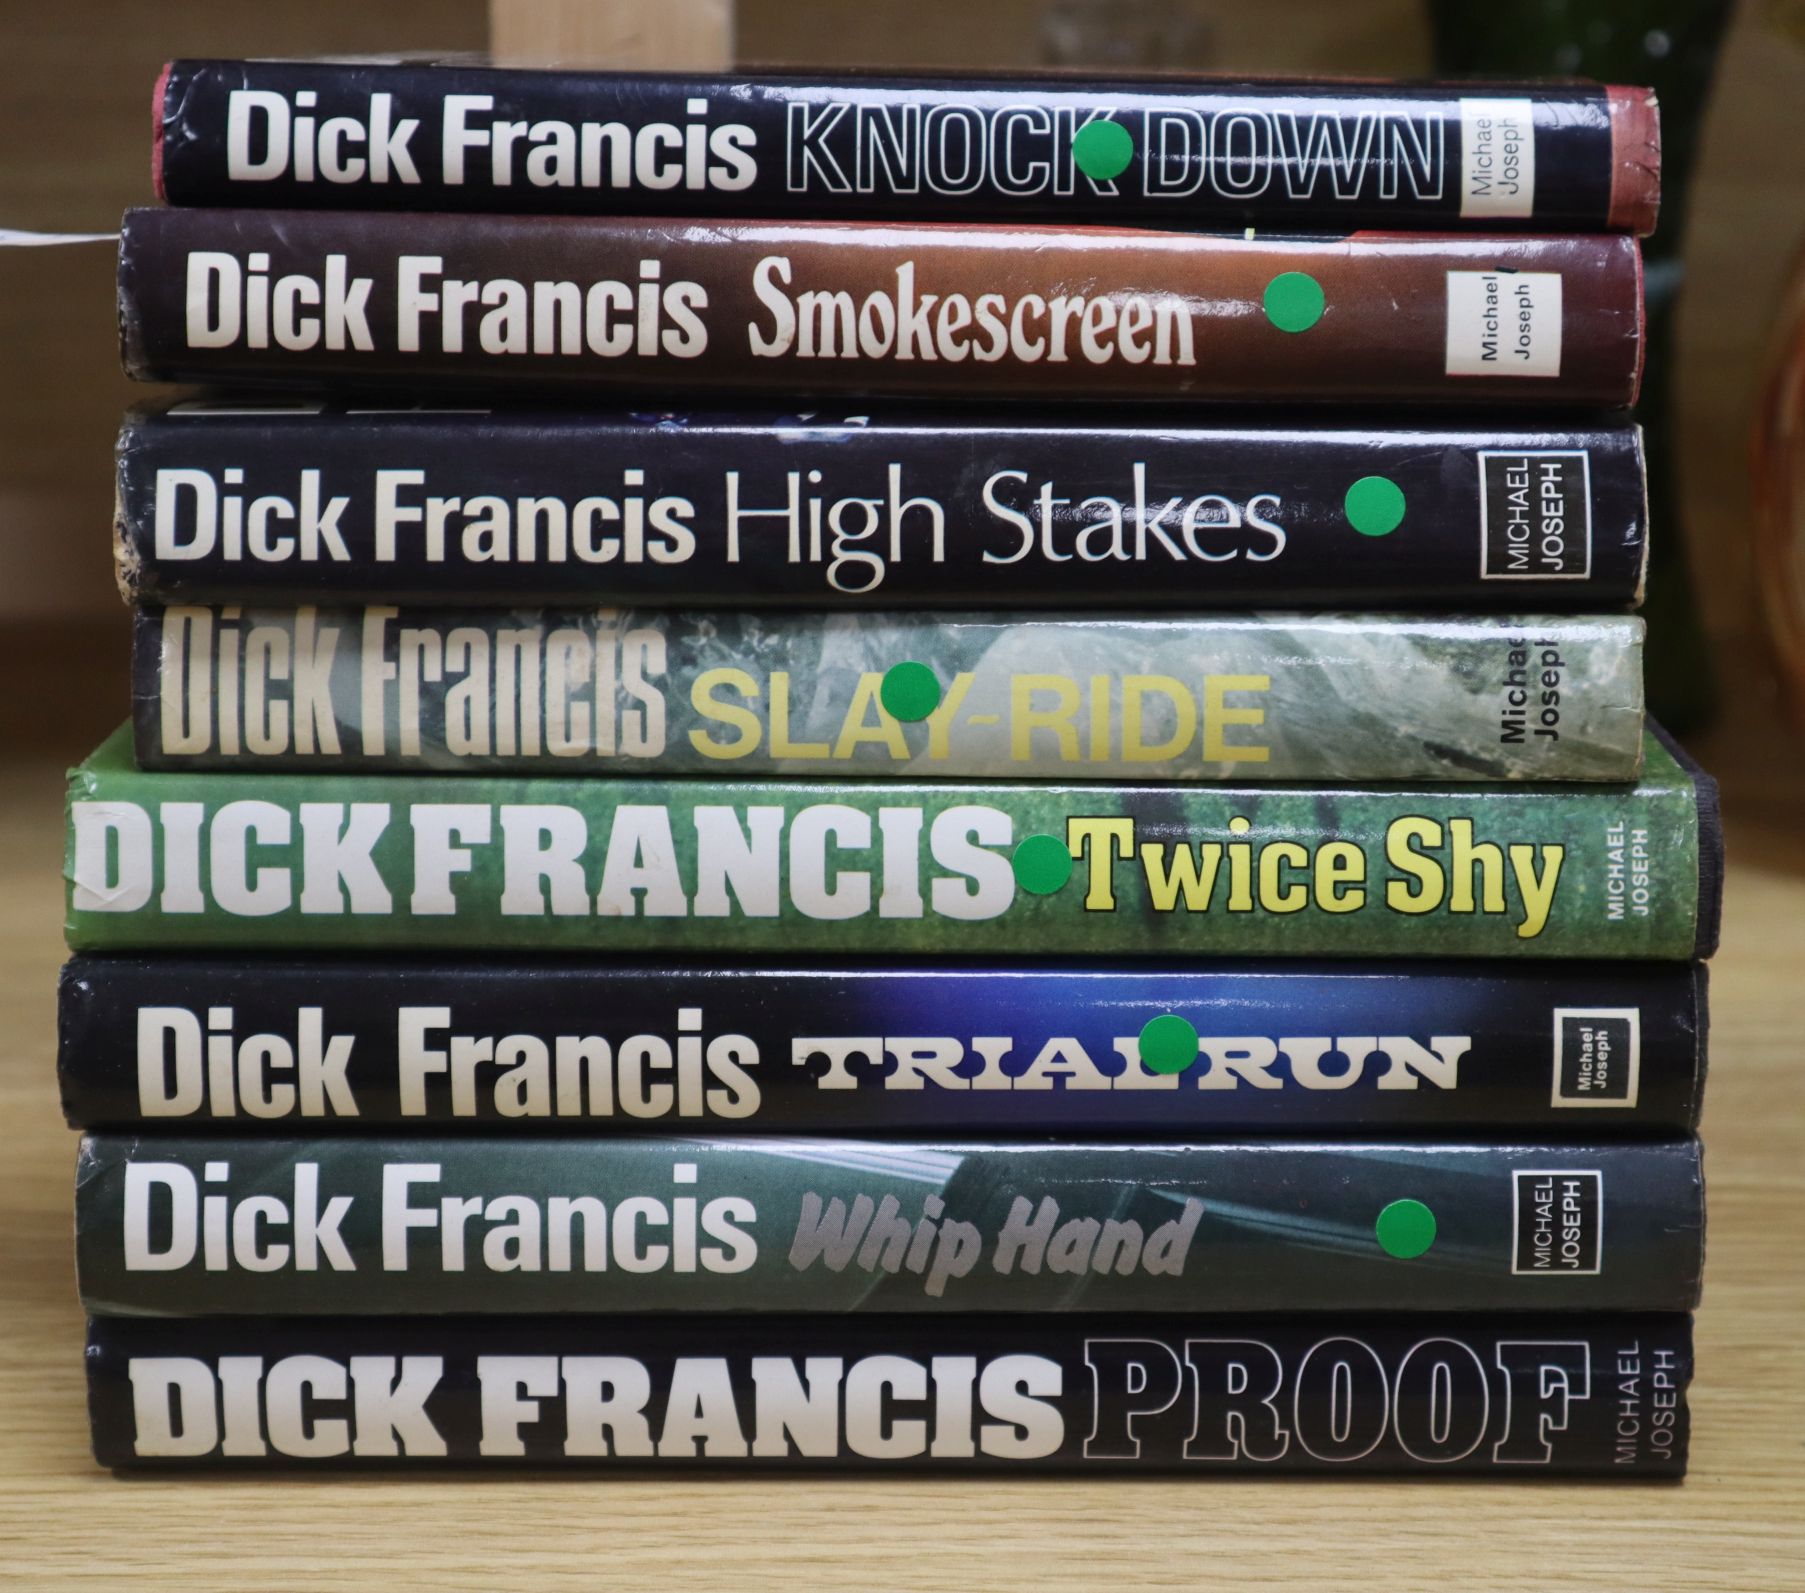 Francis, Dick - 8 First Edition novels